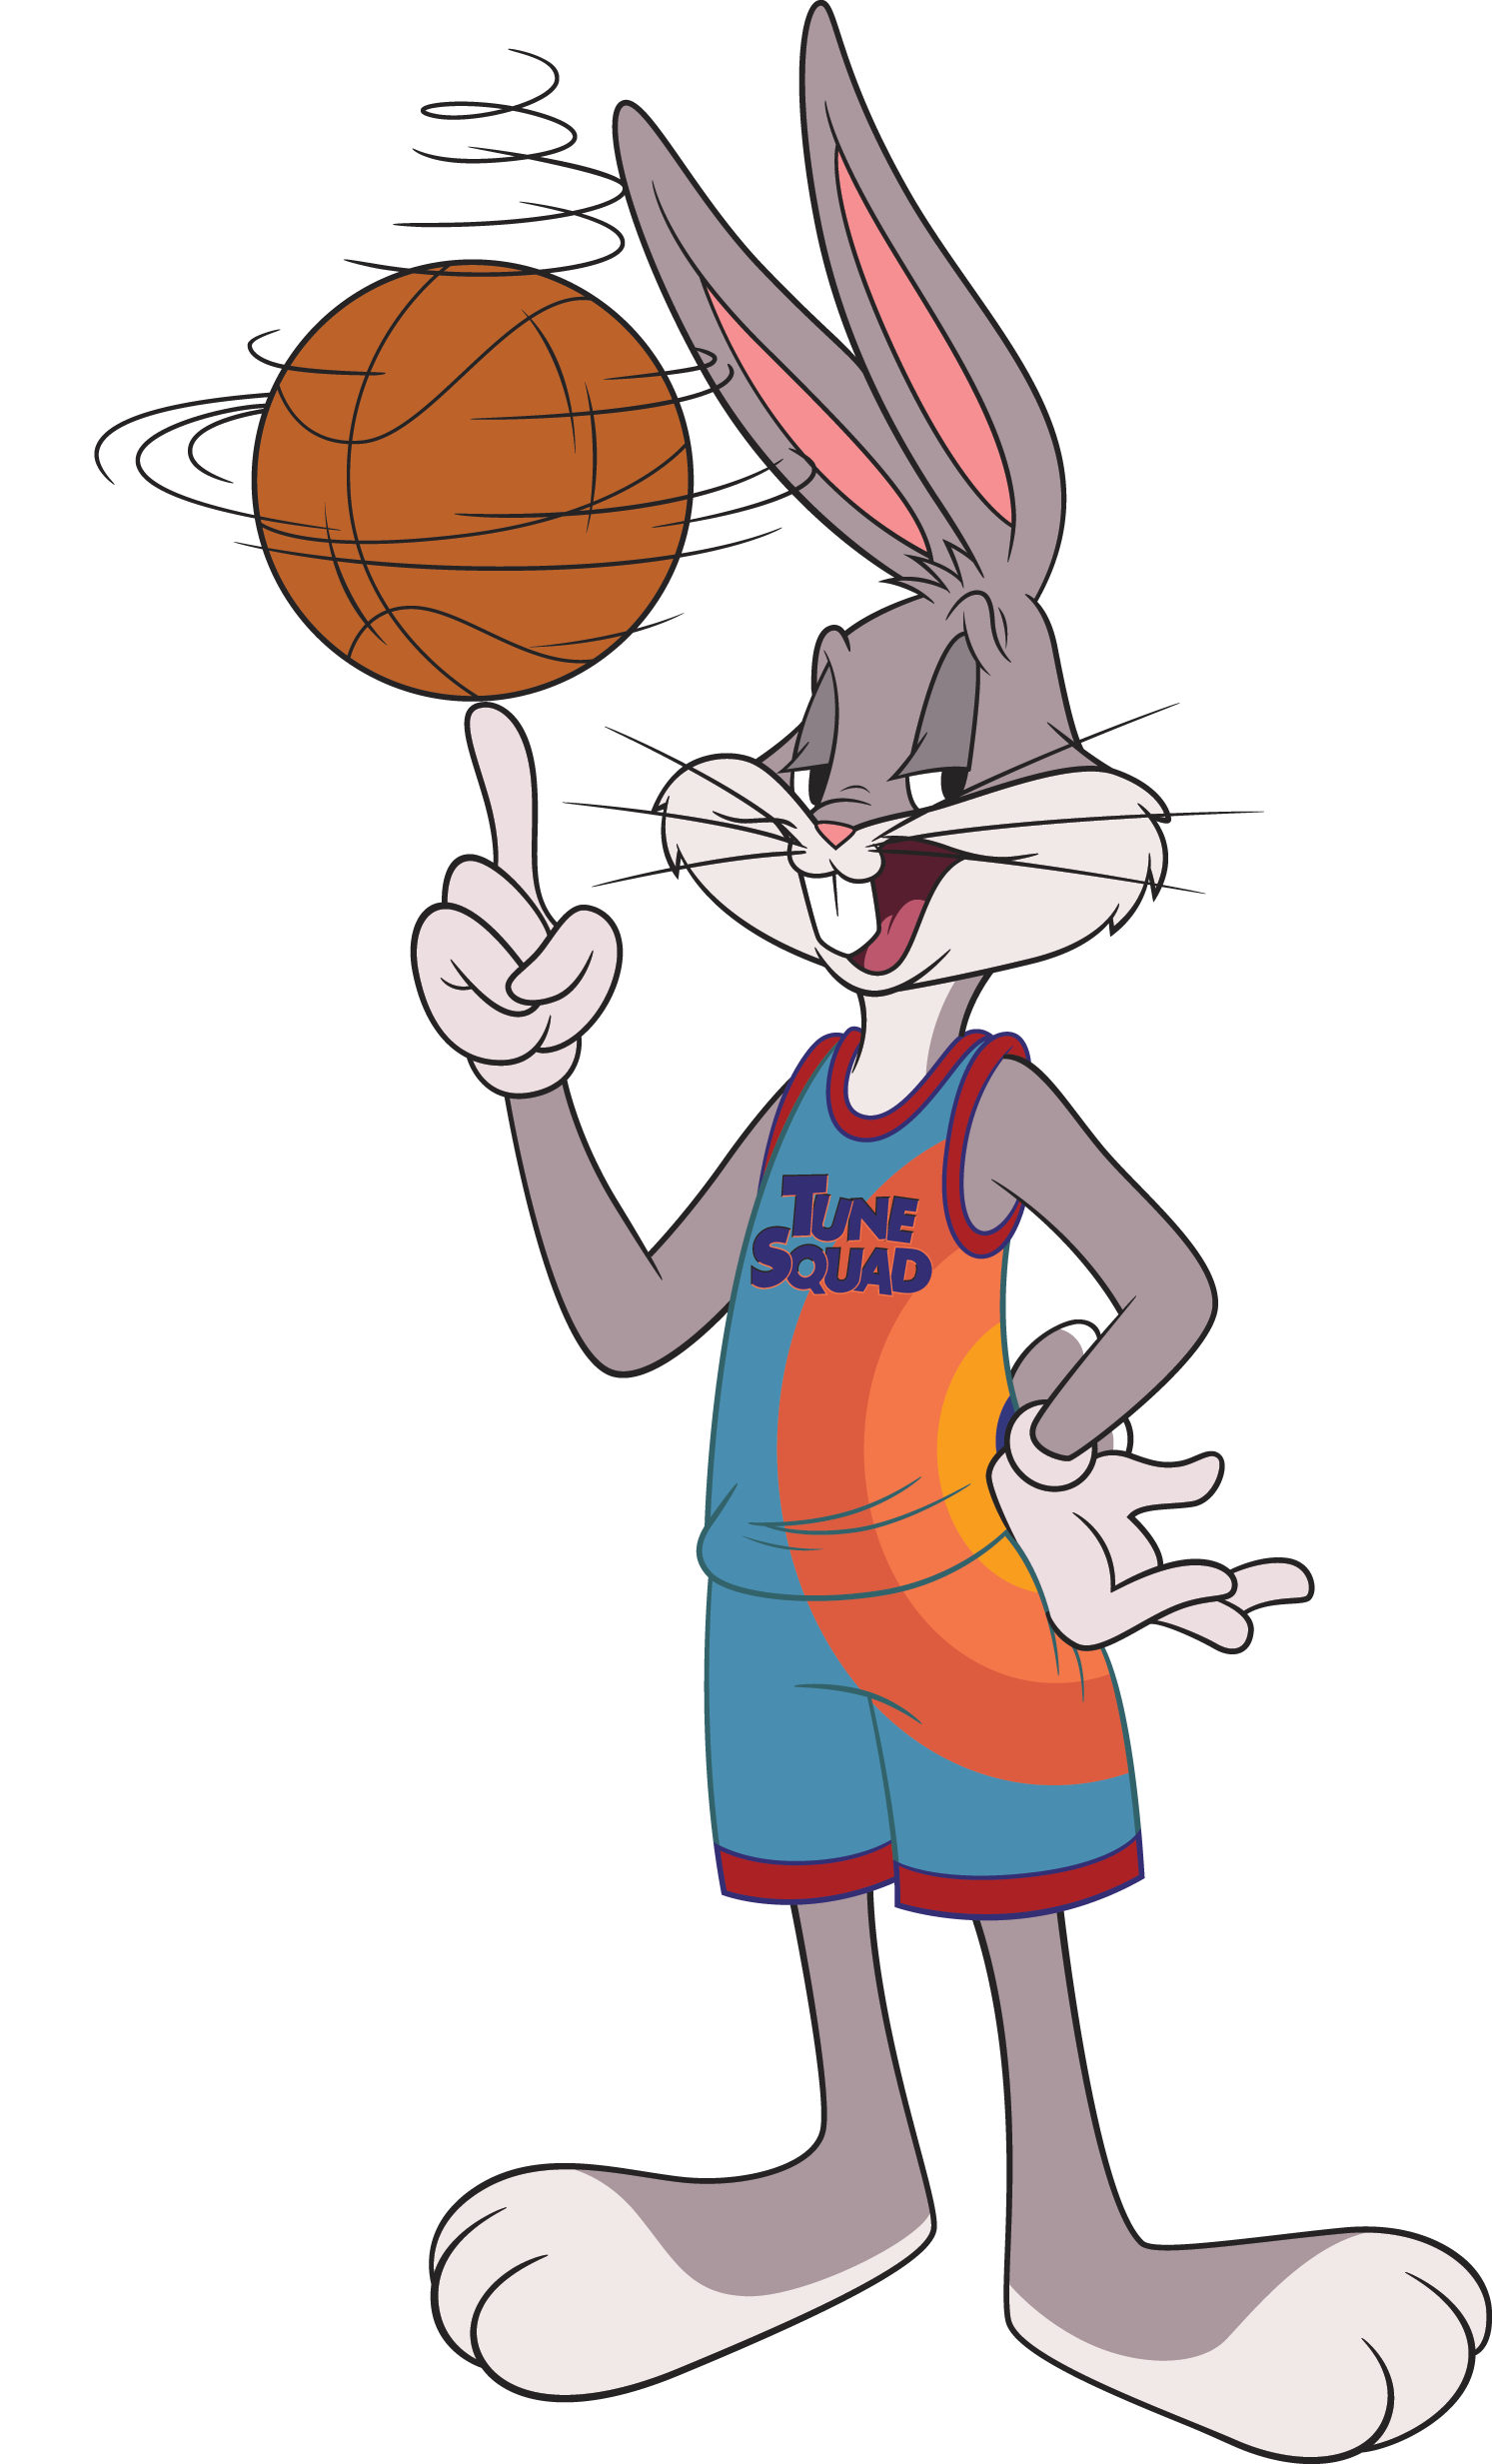 An image of Bugs Bunny wearing his Tune Squad uniform and balancing a spinning ball on his right index finger with his left hand on his hip.